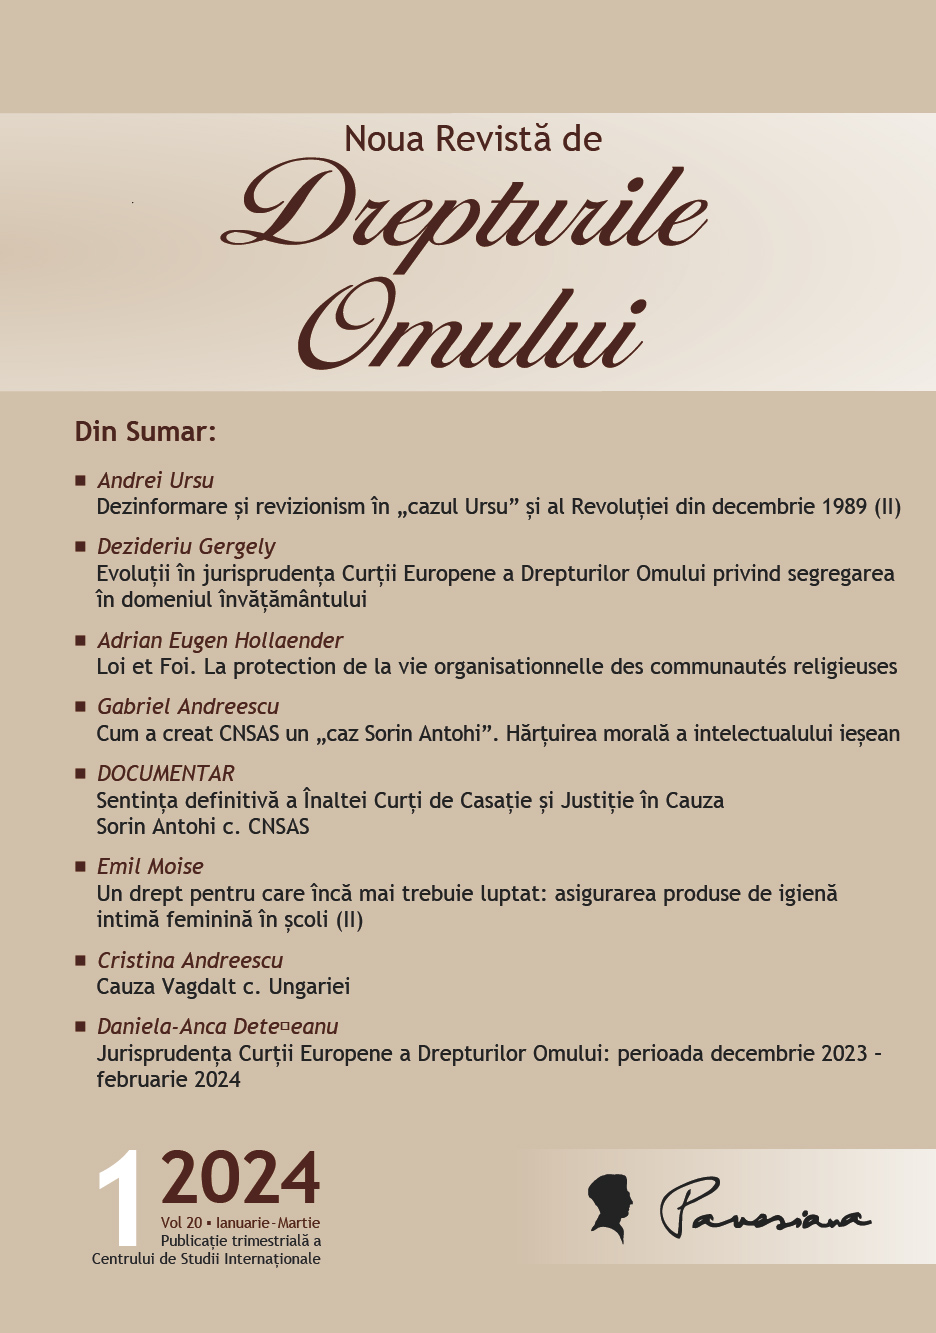 The final judgment of the High Court of Cassation and Justice in the case Sorin Antohi v. CNSAS Cover Image